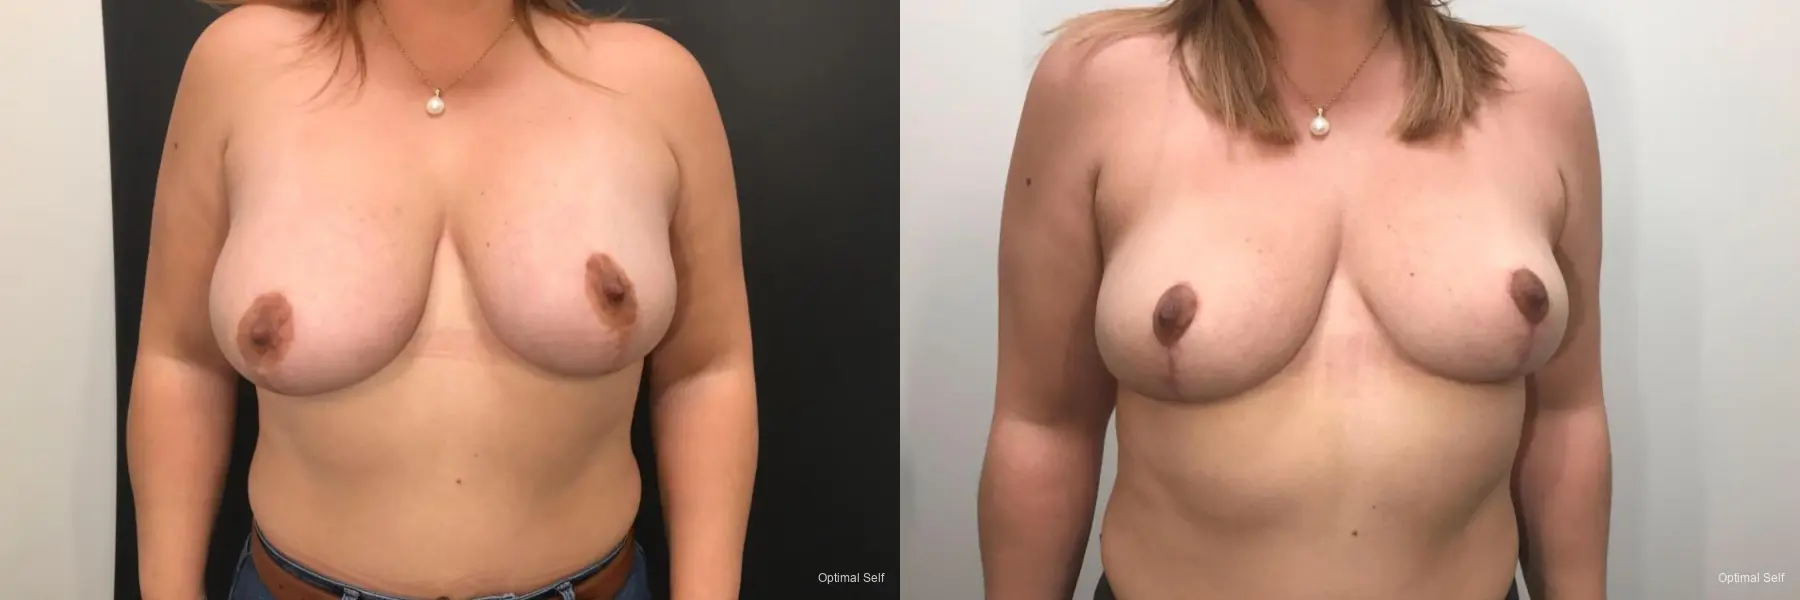 Breast Implant Removal With Lift: Patient 3 - Before and After  